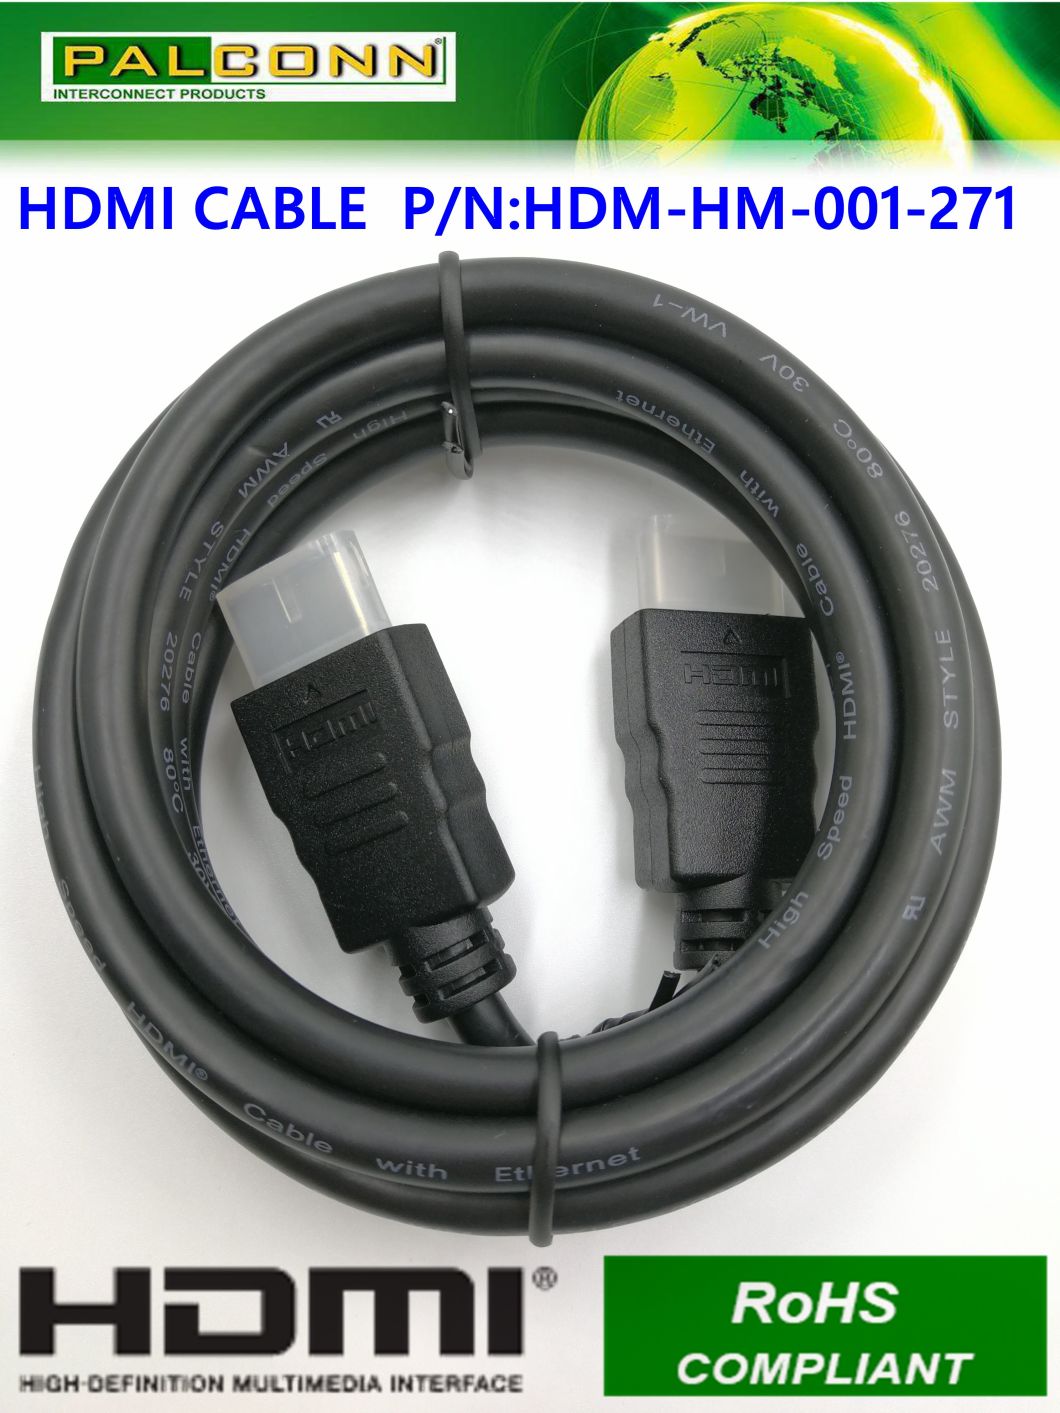 HDMI1.4 Cable, HDMI2.0 Cable, USB Type C to HDMI Cable